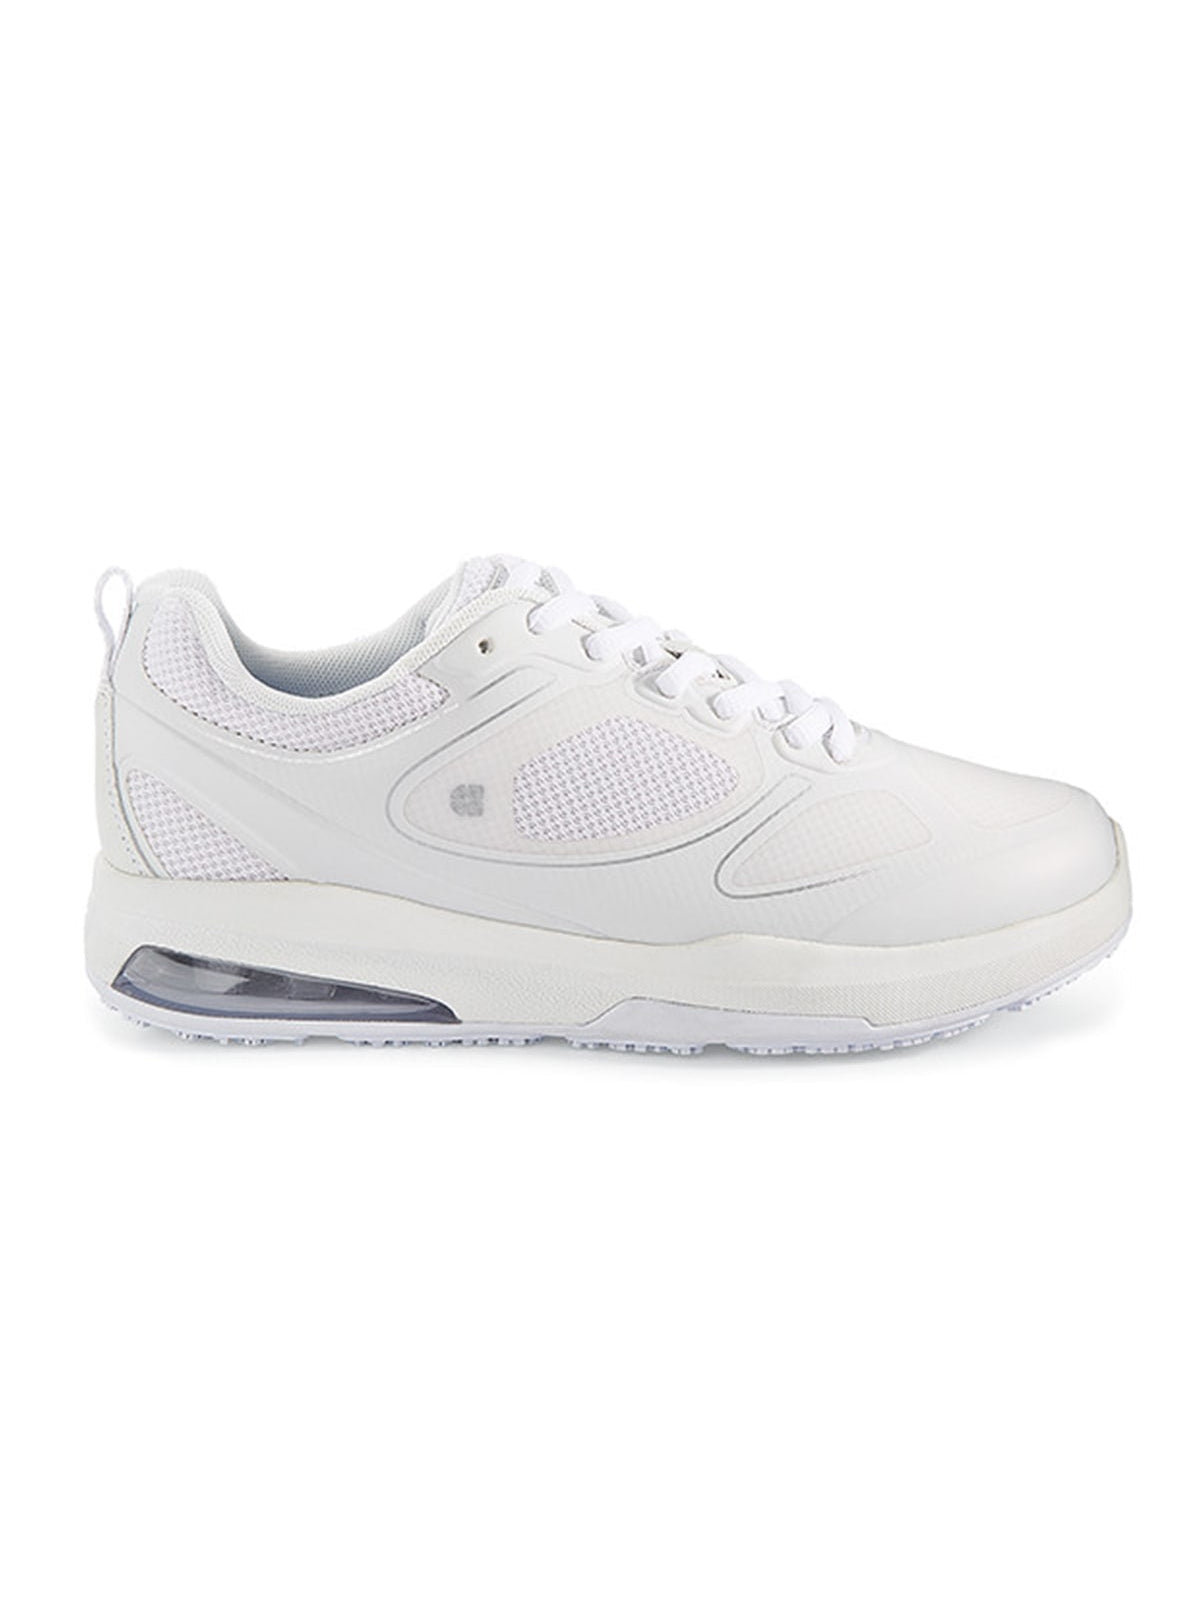 Women's Work Shoe Revolution 2 White by Shoes For Crews -  ChefsCotton